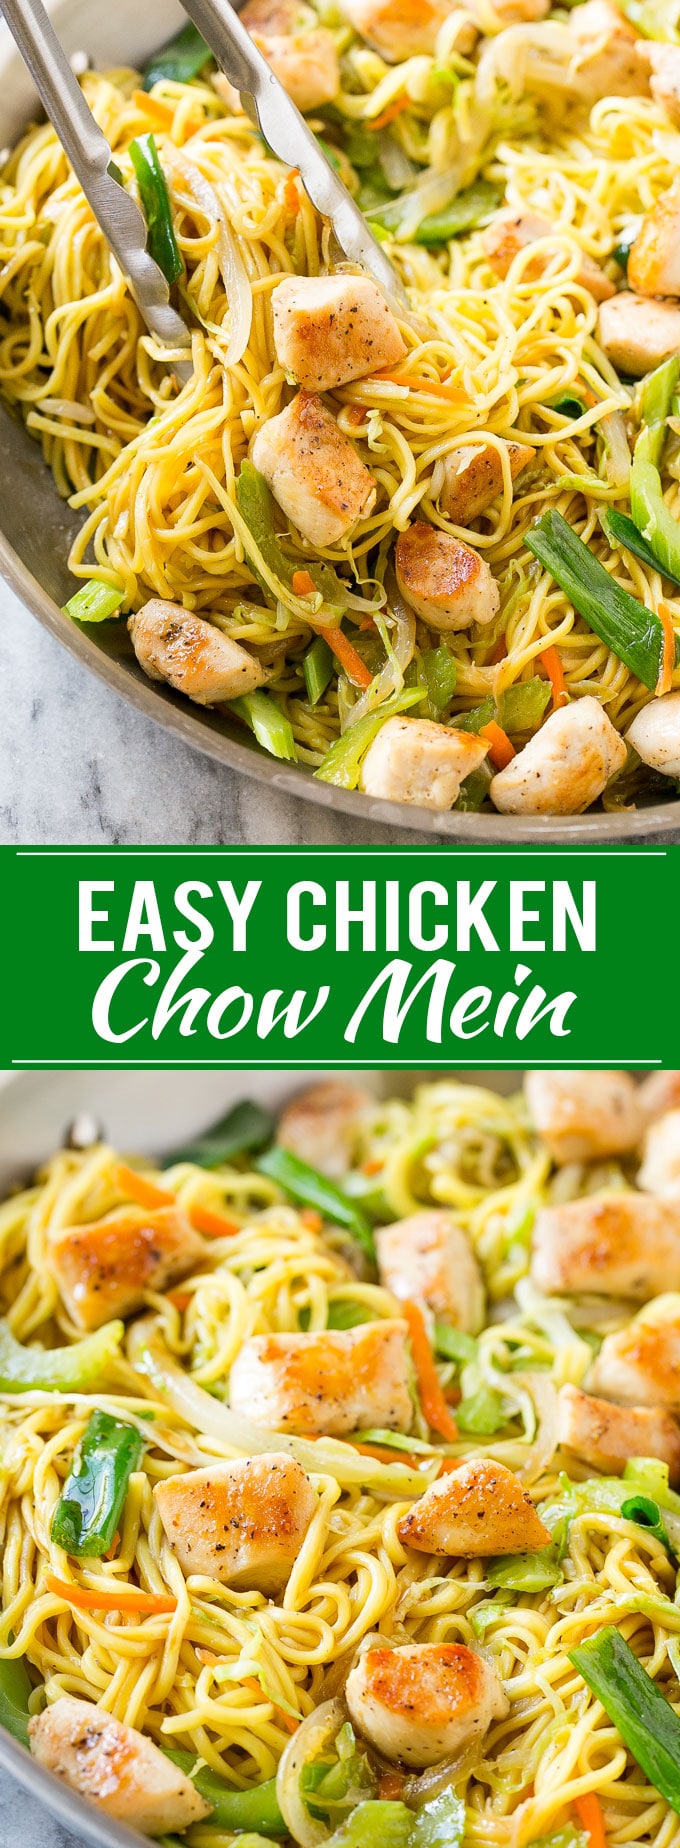 Chicken Chow Mein Recipe | Easy Chicken Recipe | Chow Mein | Chinese Food #chowmein #takeout #asianfood #dinneratthezoo